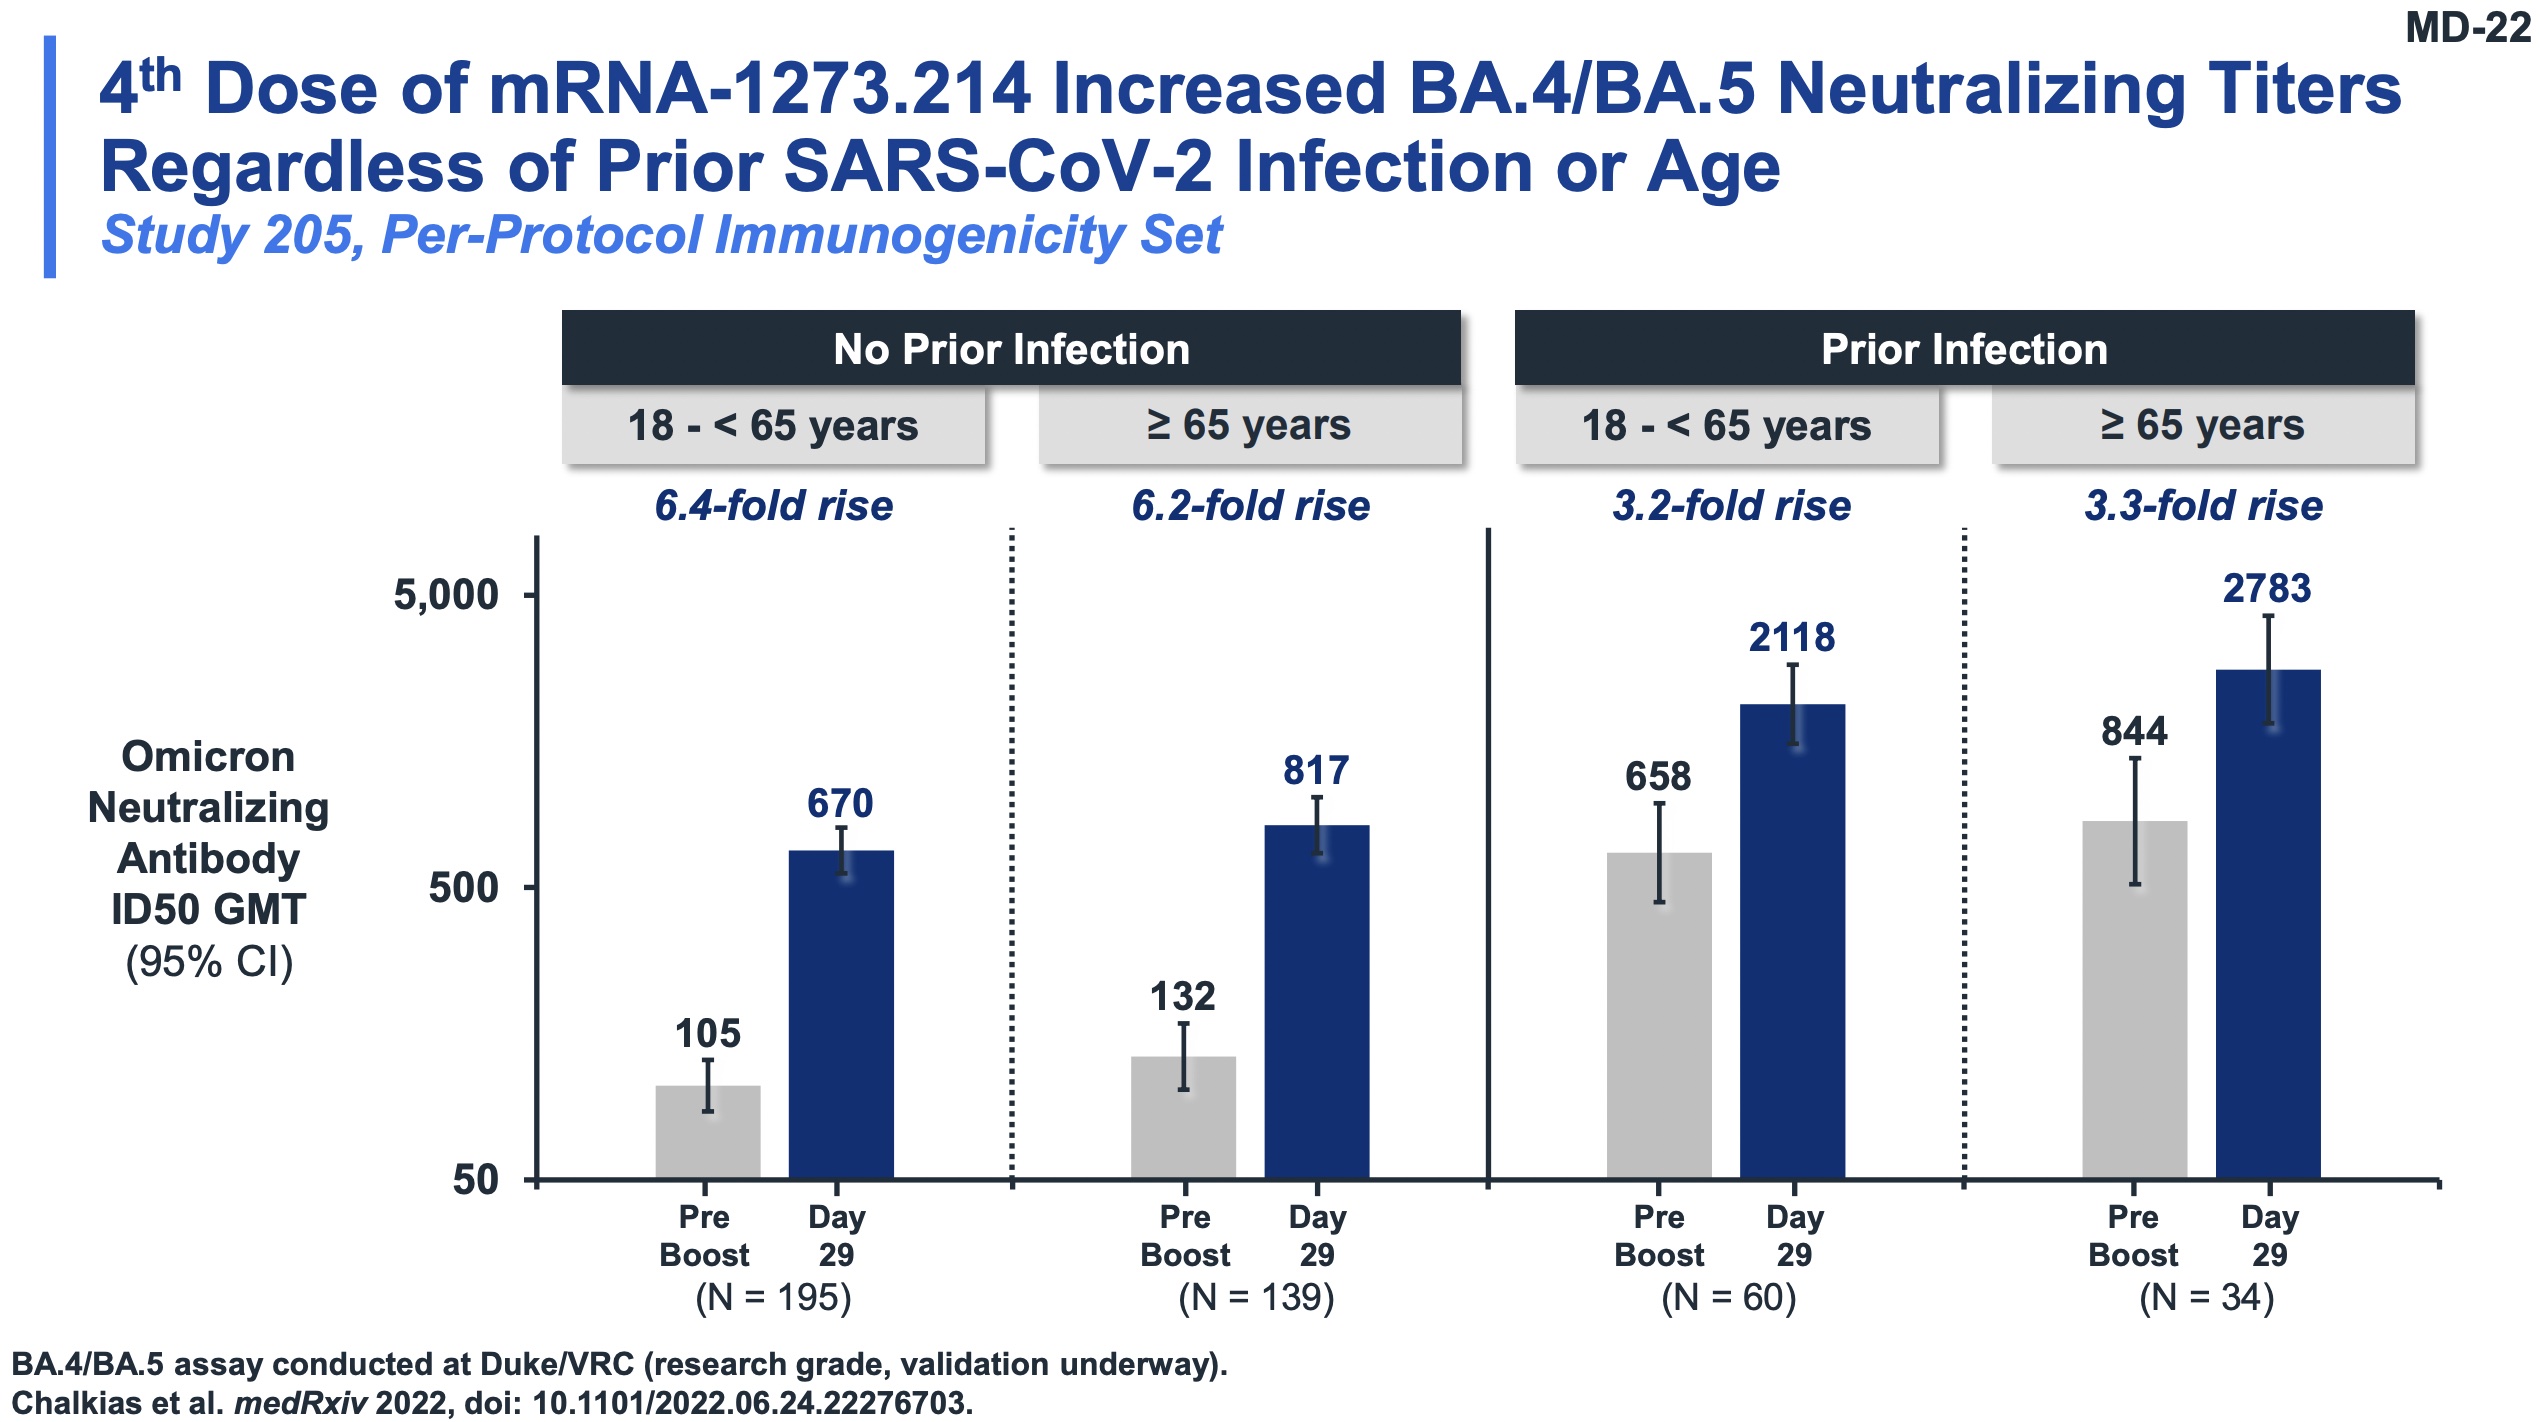 Moderna @ VRBPAC: It also works vs Omicron/BA.4-5, regardless of age or prior infection